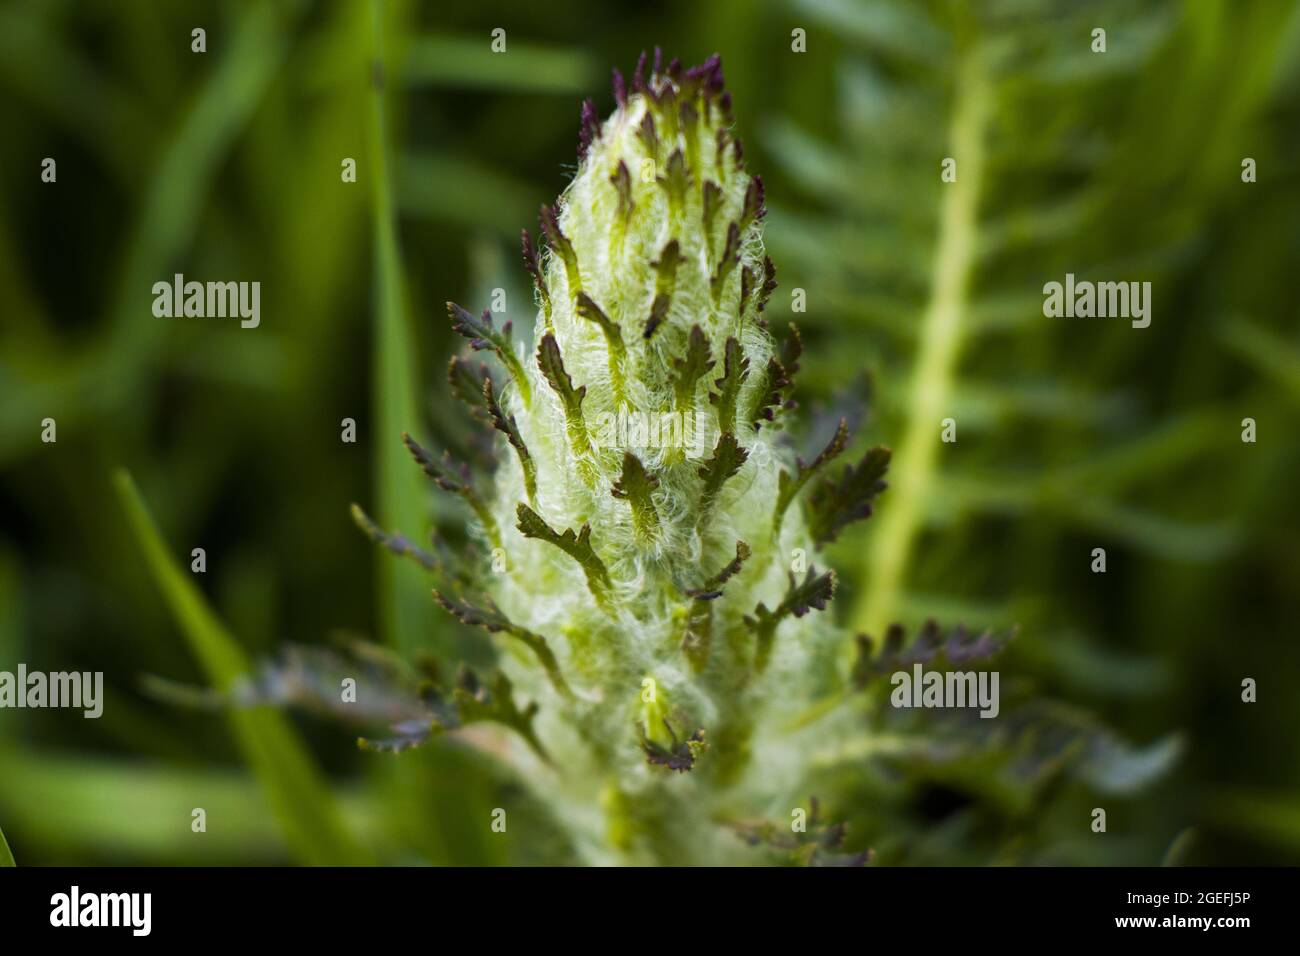 Selective focus of Slender pedicularis flower in a field against a blurred background Stock Photo